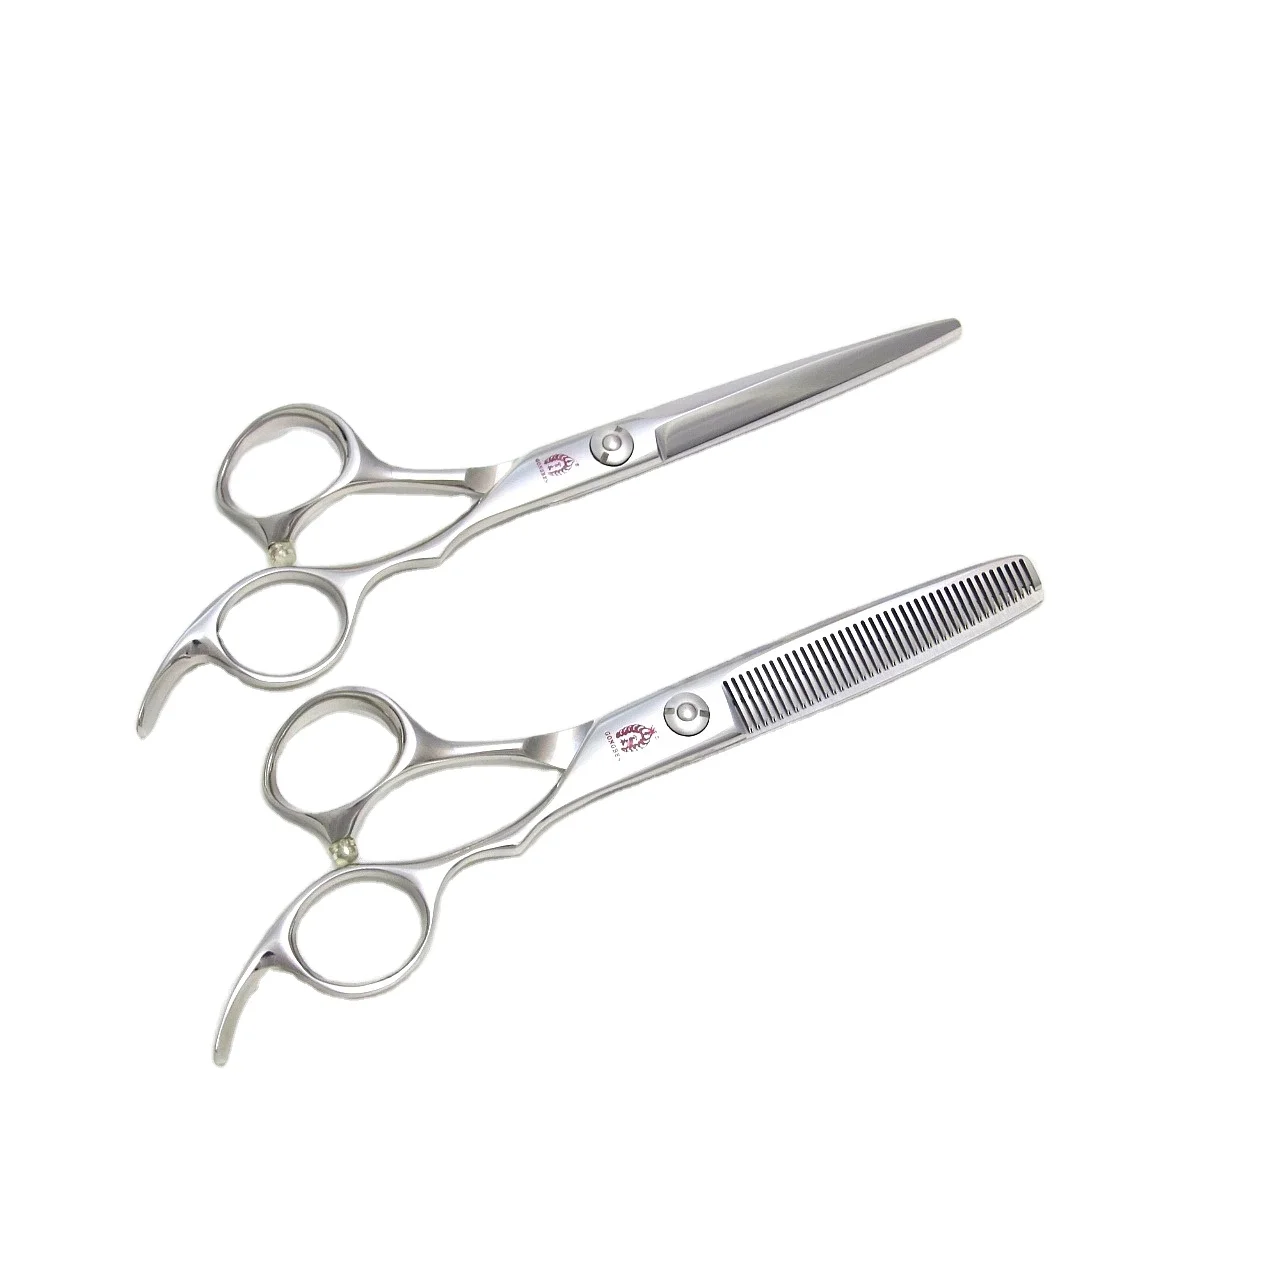 

GONG BEN hairdressing shears steel stainless style beauty handle accept blade material scissors, Silver